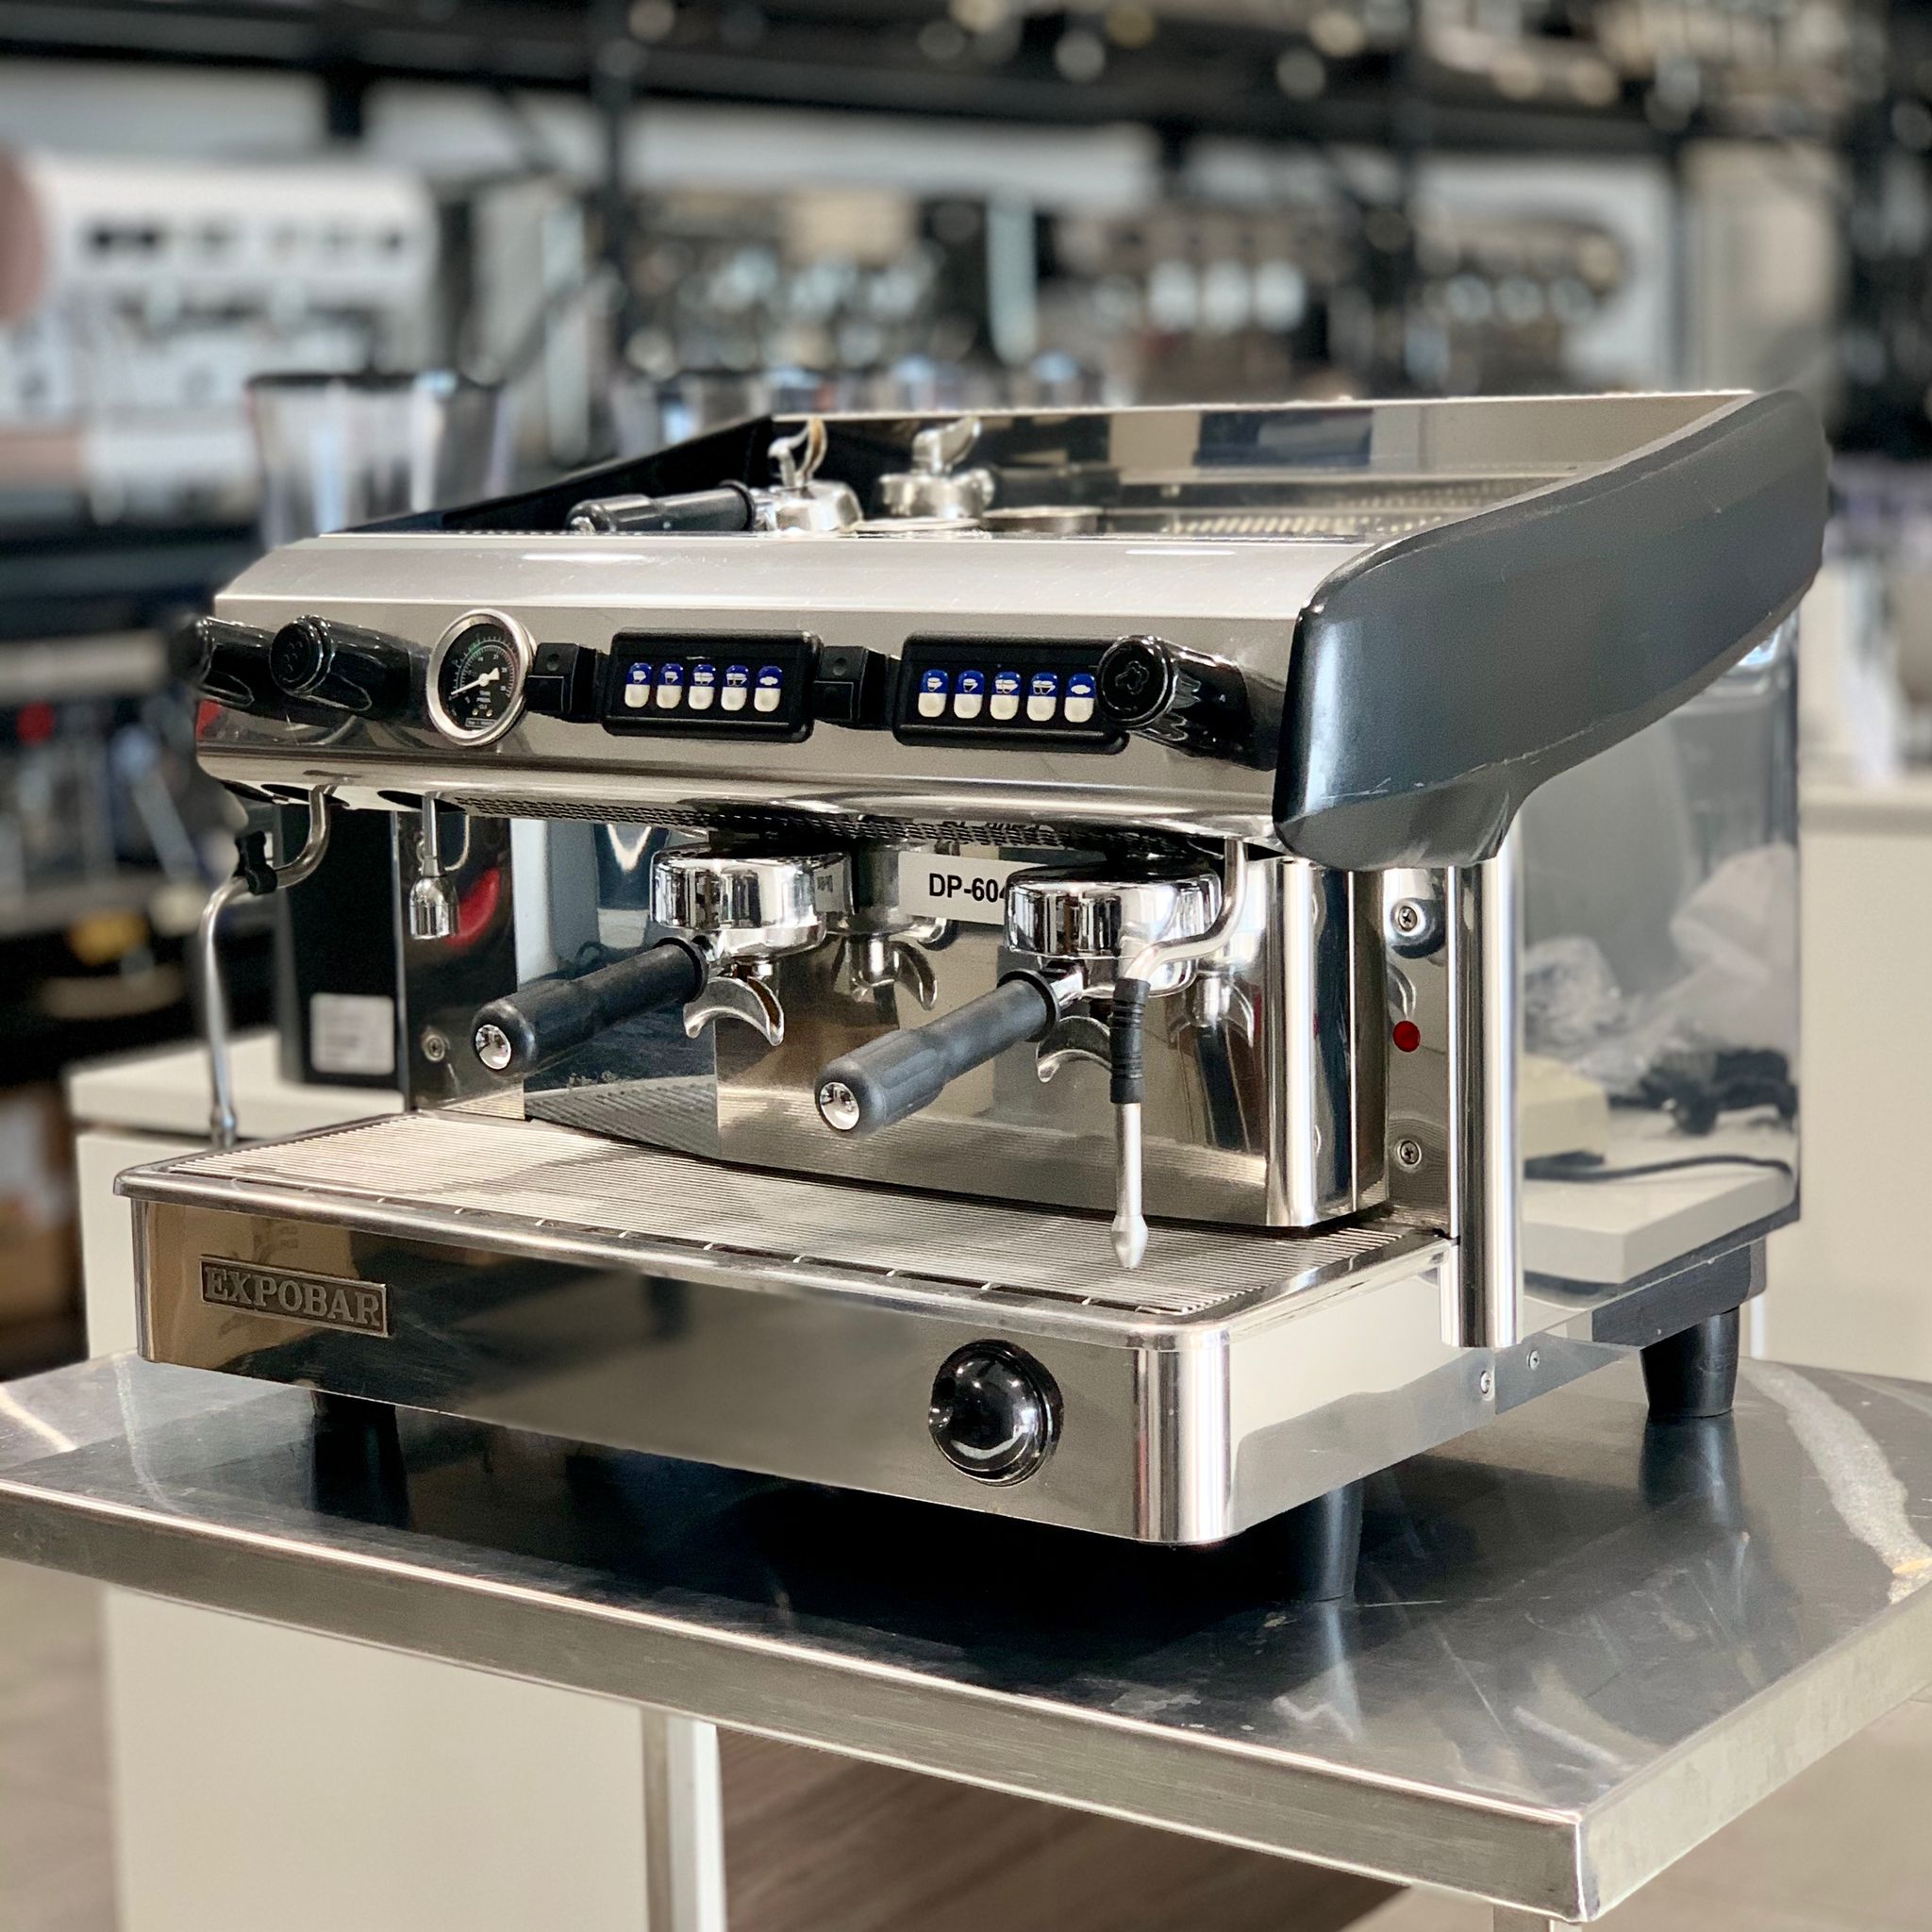 Expobar Cheap Used 2 Group Expobar Commercial Coffee Espresso Machine